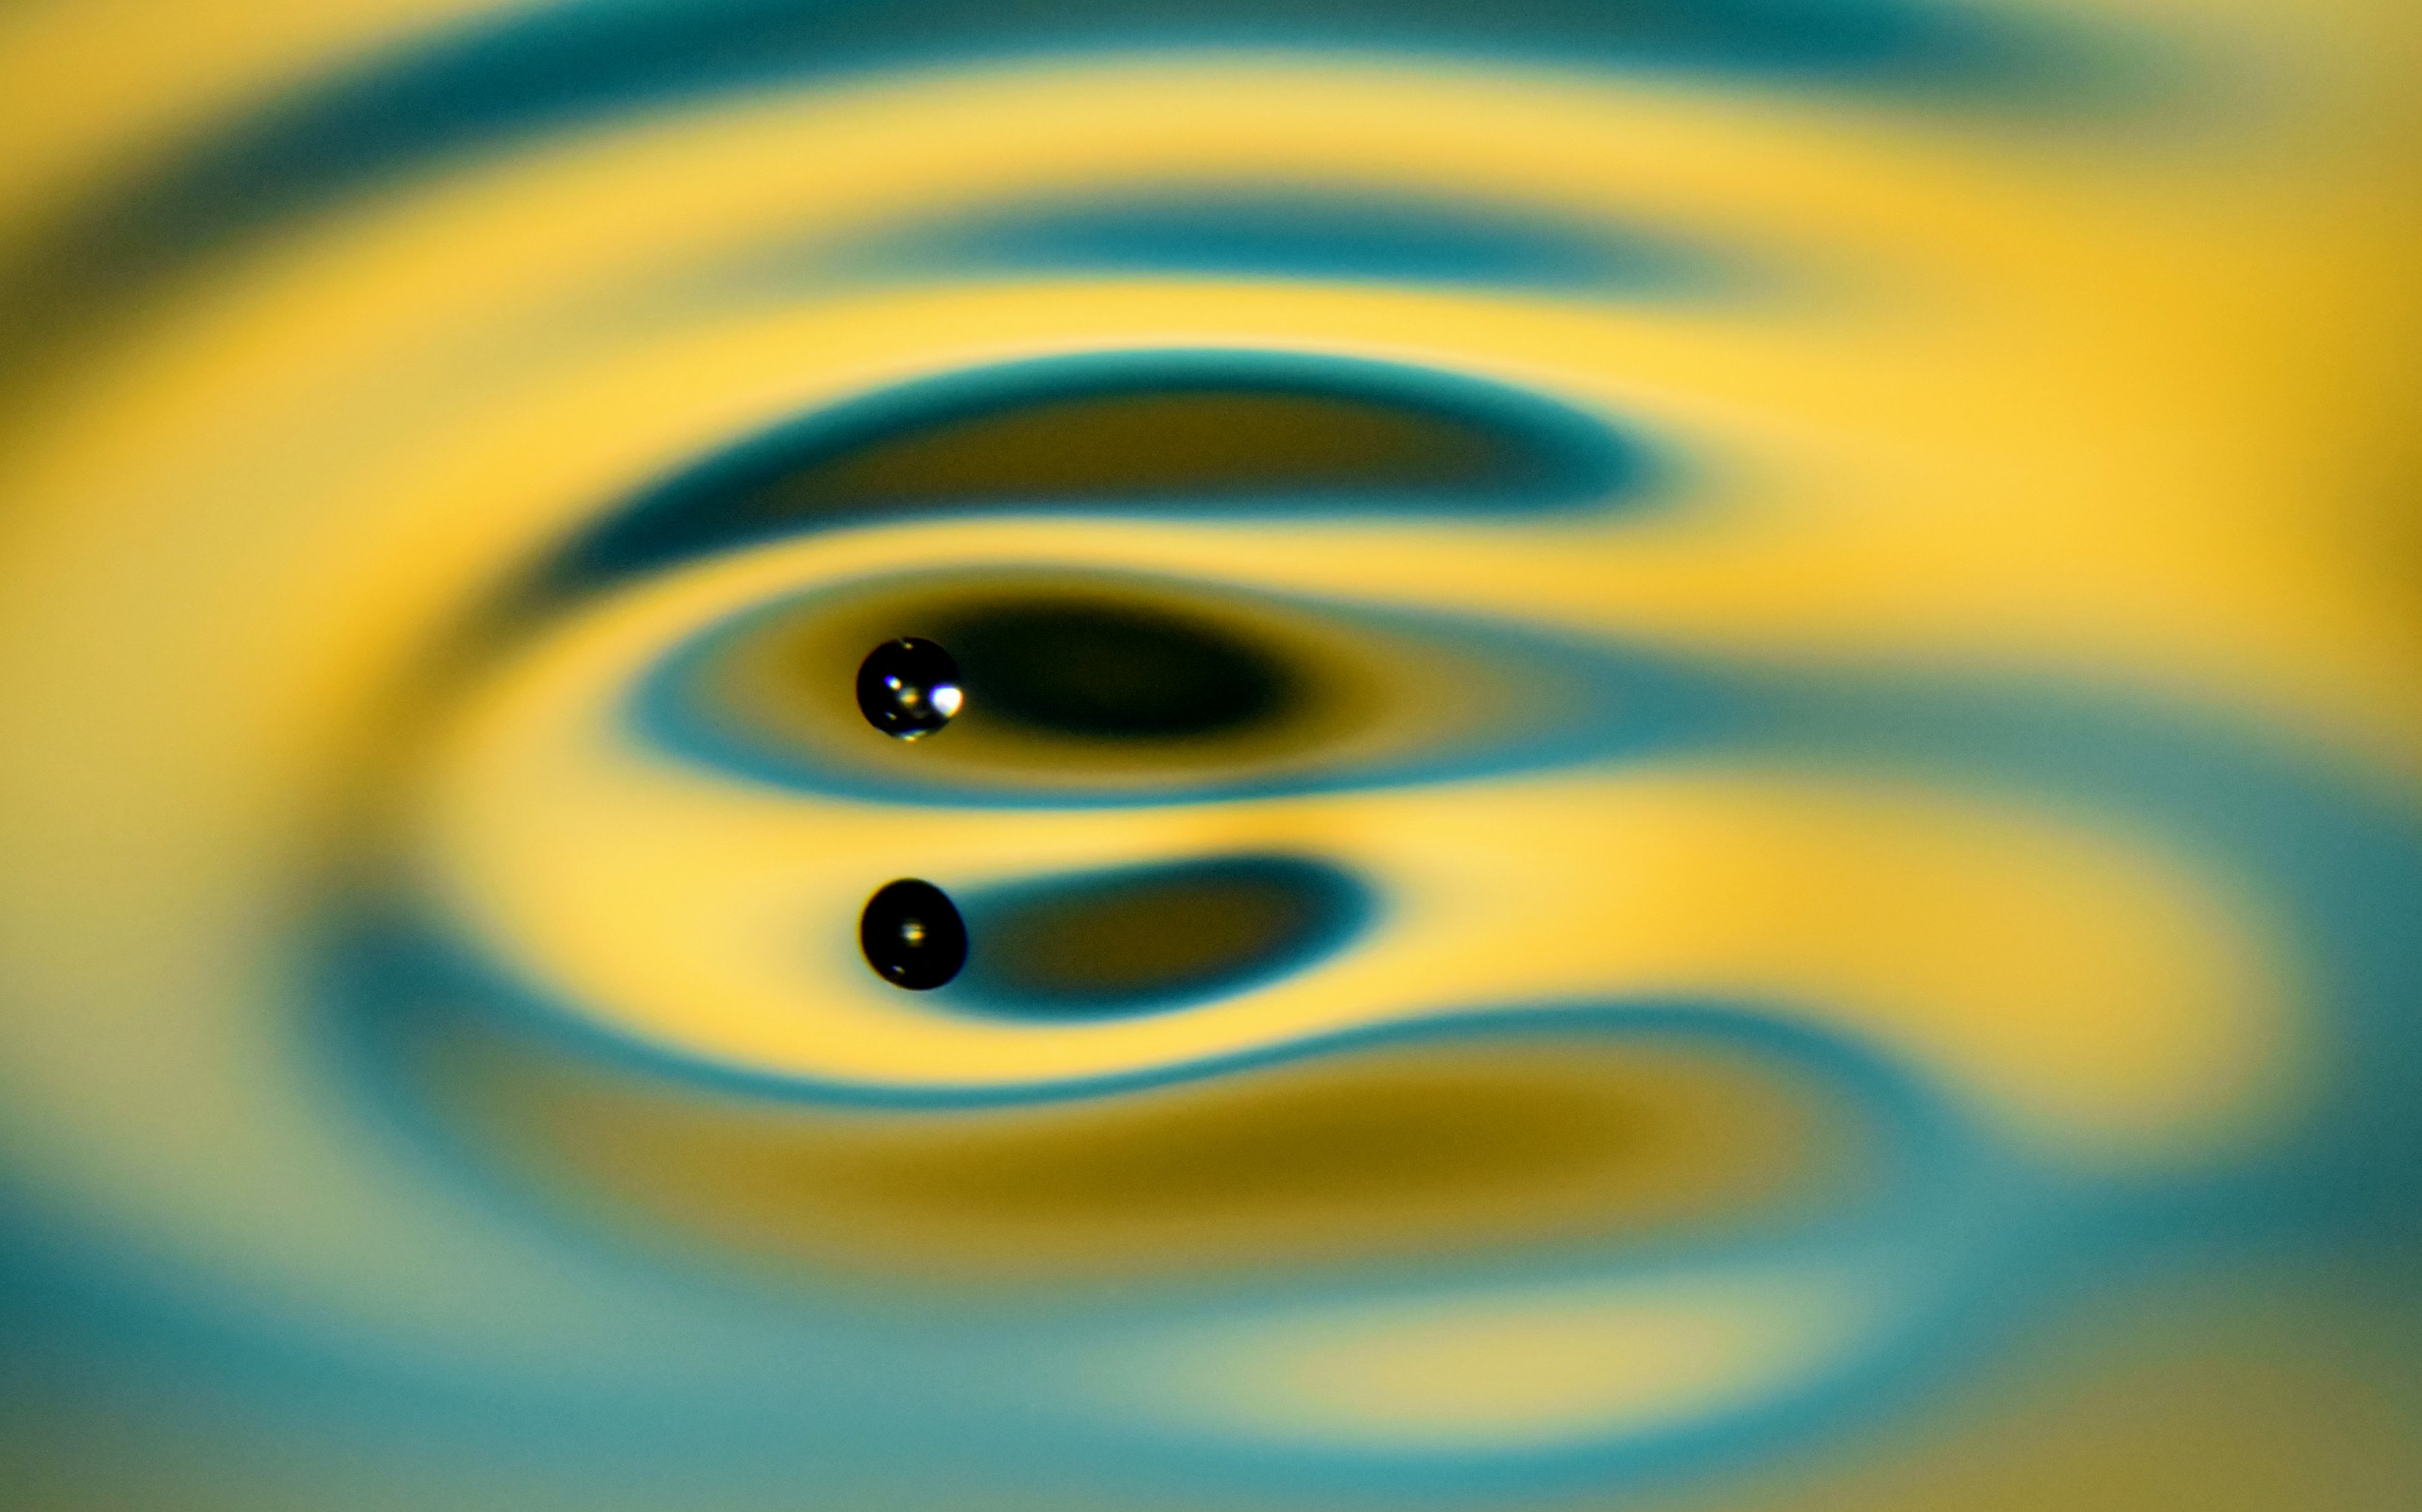 A millimeter-sized oil droplet can bounce on a vertically vibrated liquid bath for an unlimited time. It may couple to the surface wave it emits, leading to horizontal self-propulsion as an object called a walker. Its motion is captured optically with a Nikon camera while an LED light is illuminated through a diffuser (array of blue and yellow colour sheets).
